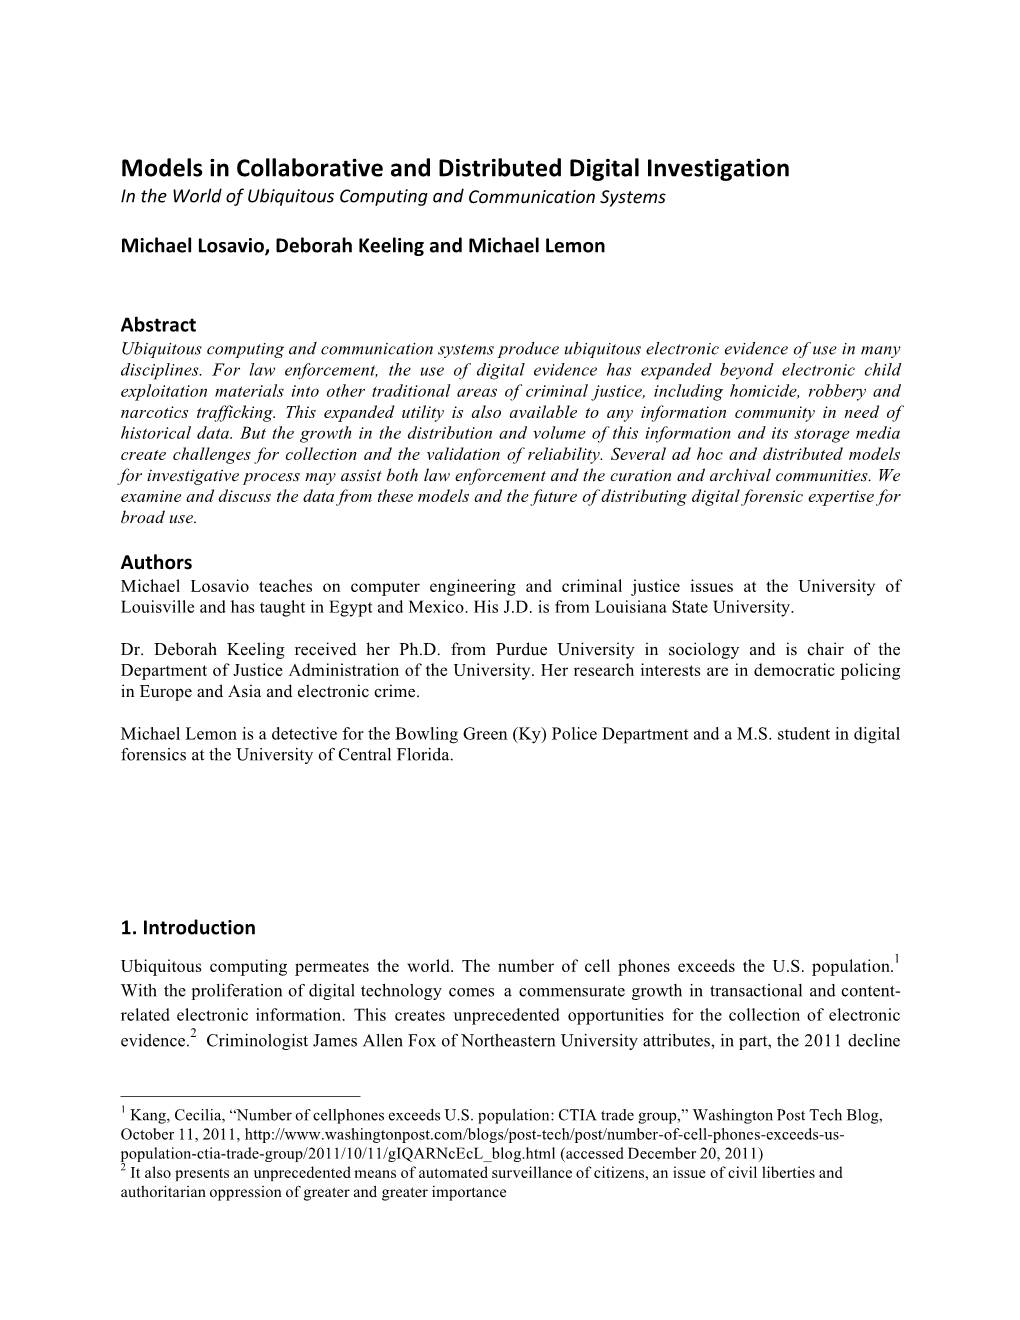 Models in Collaborative and Distributed Digital Investigation in the World of Ubiquitous Computing and Communication Systems